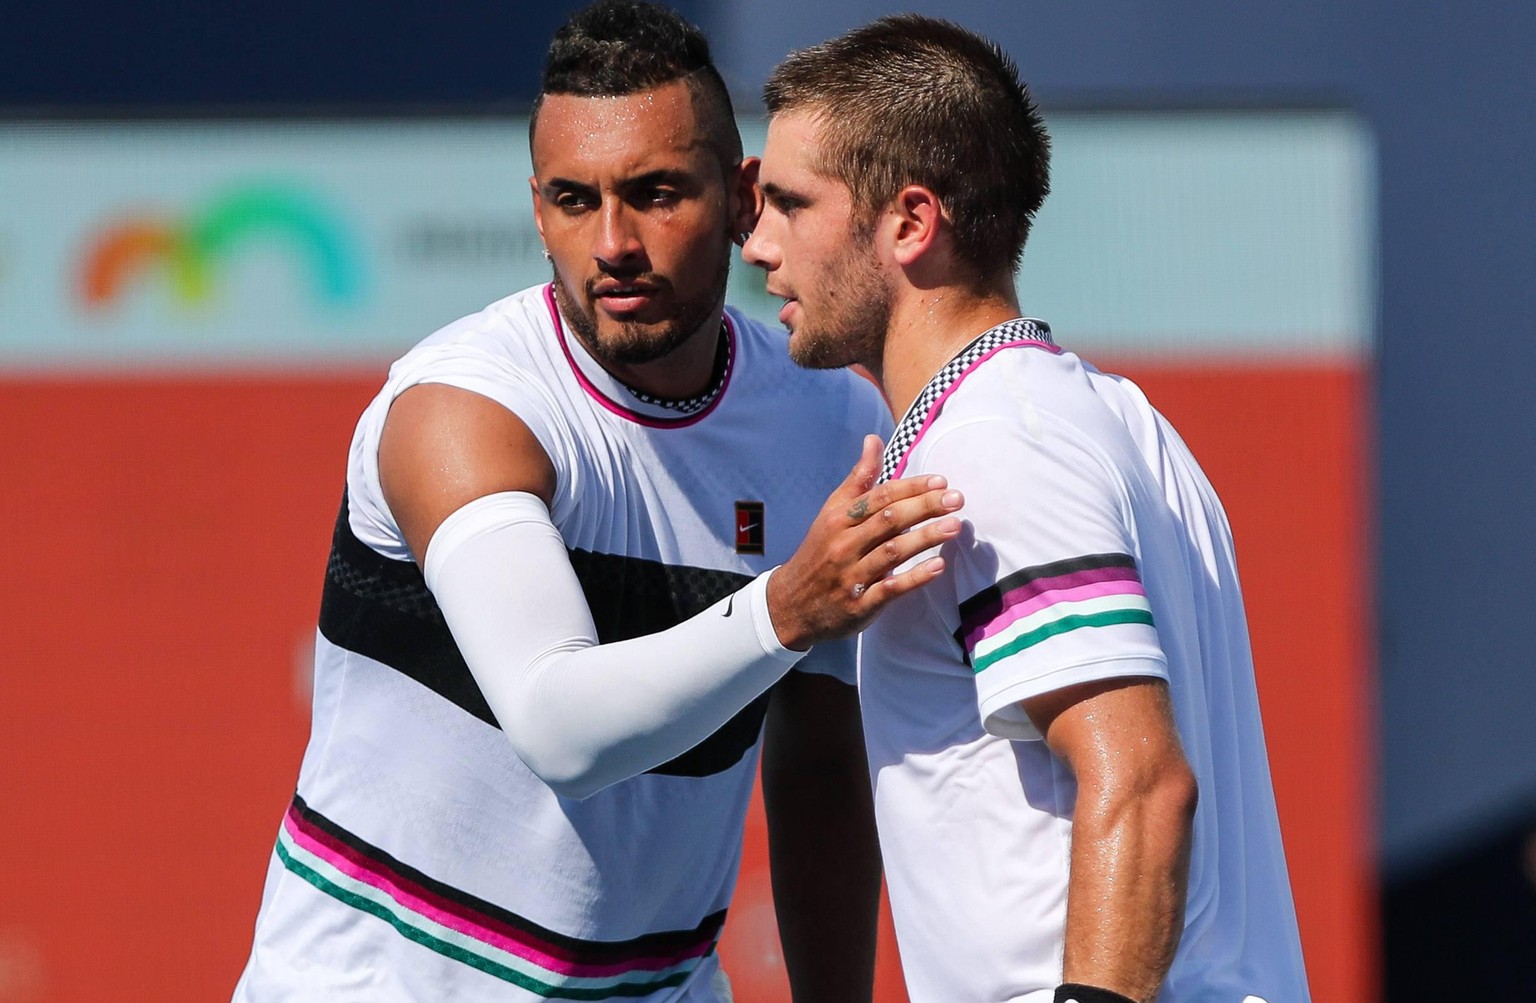 March 26, 2019: Nick Kyrgios, of Australia, (left) congratulates Borna Coric, of Croatia, (right) at the net at the end of a fourth round match of the 2019 Miami Open Presented by Itau professional te ...